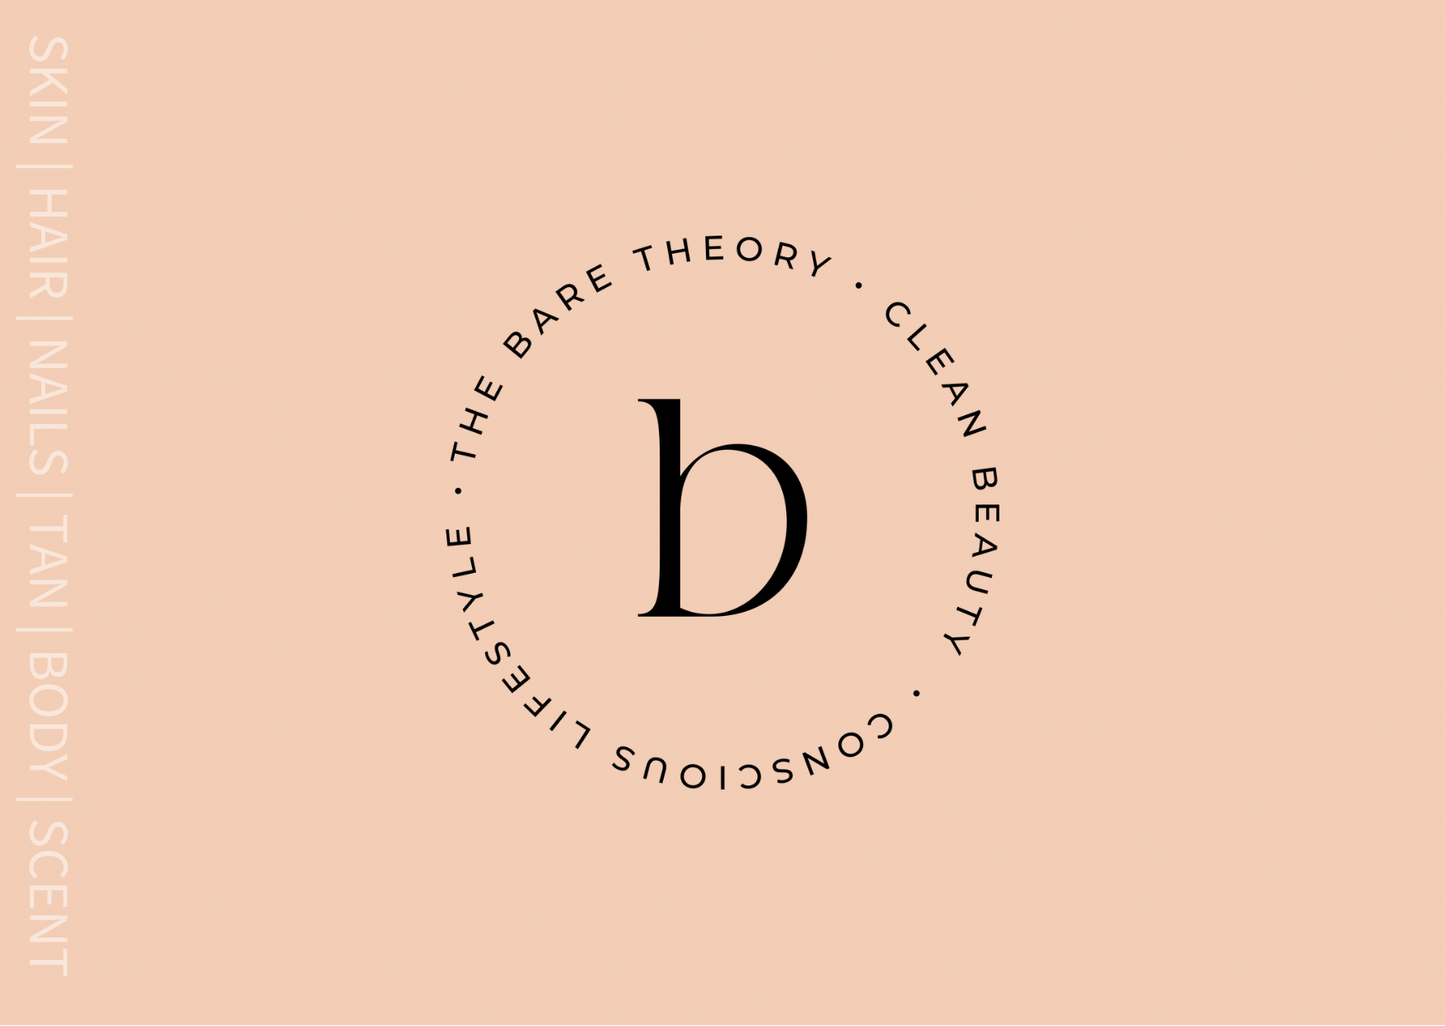 The Bare Theory Gift Voucher - The Bare Theory